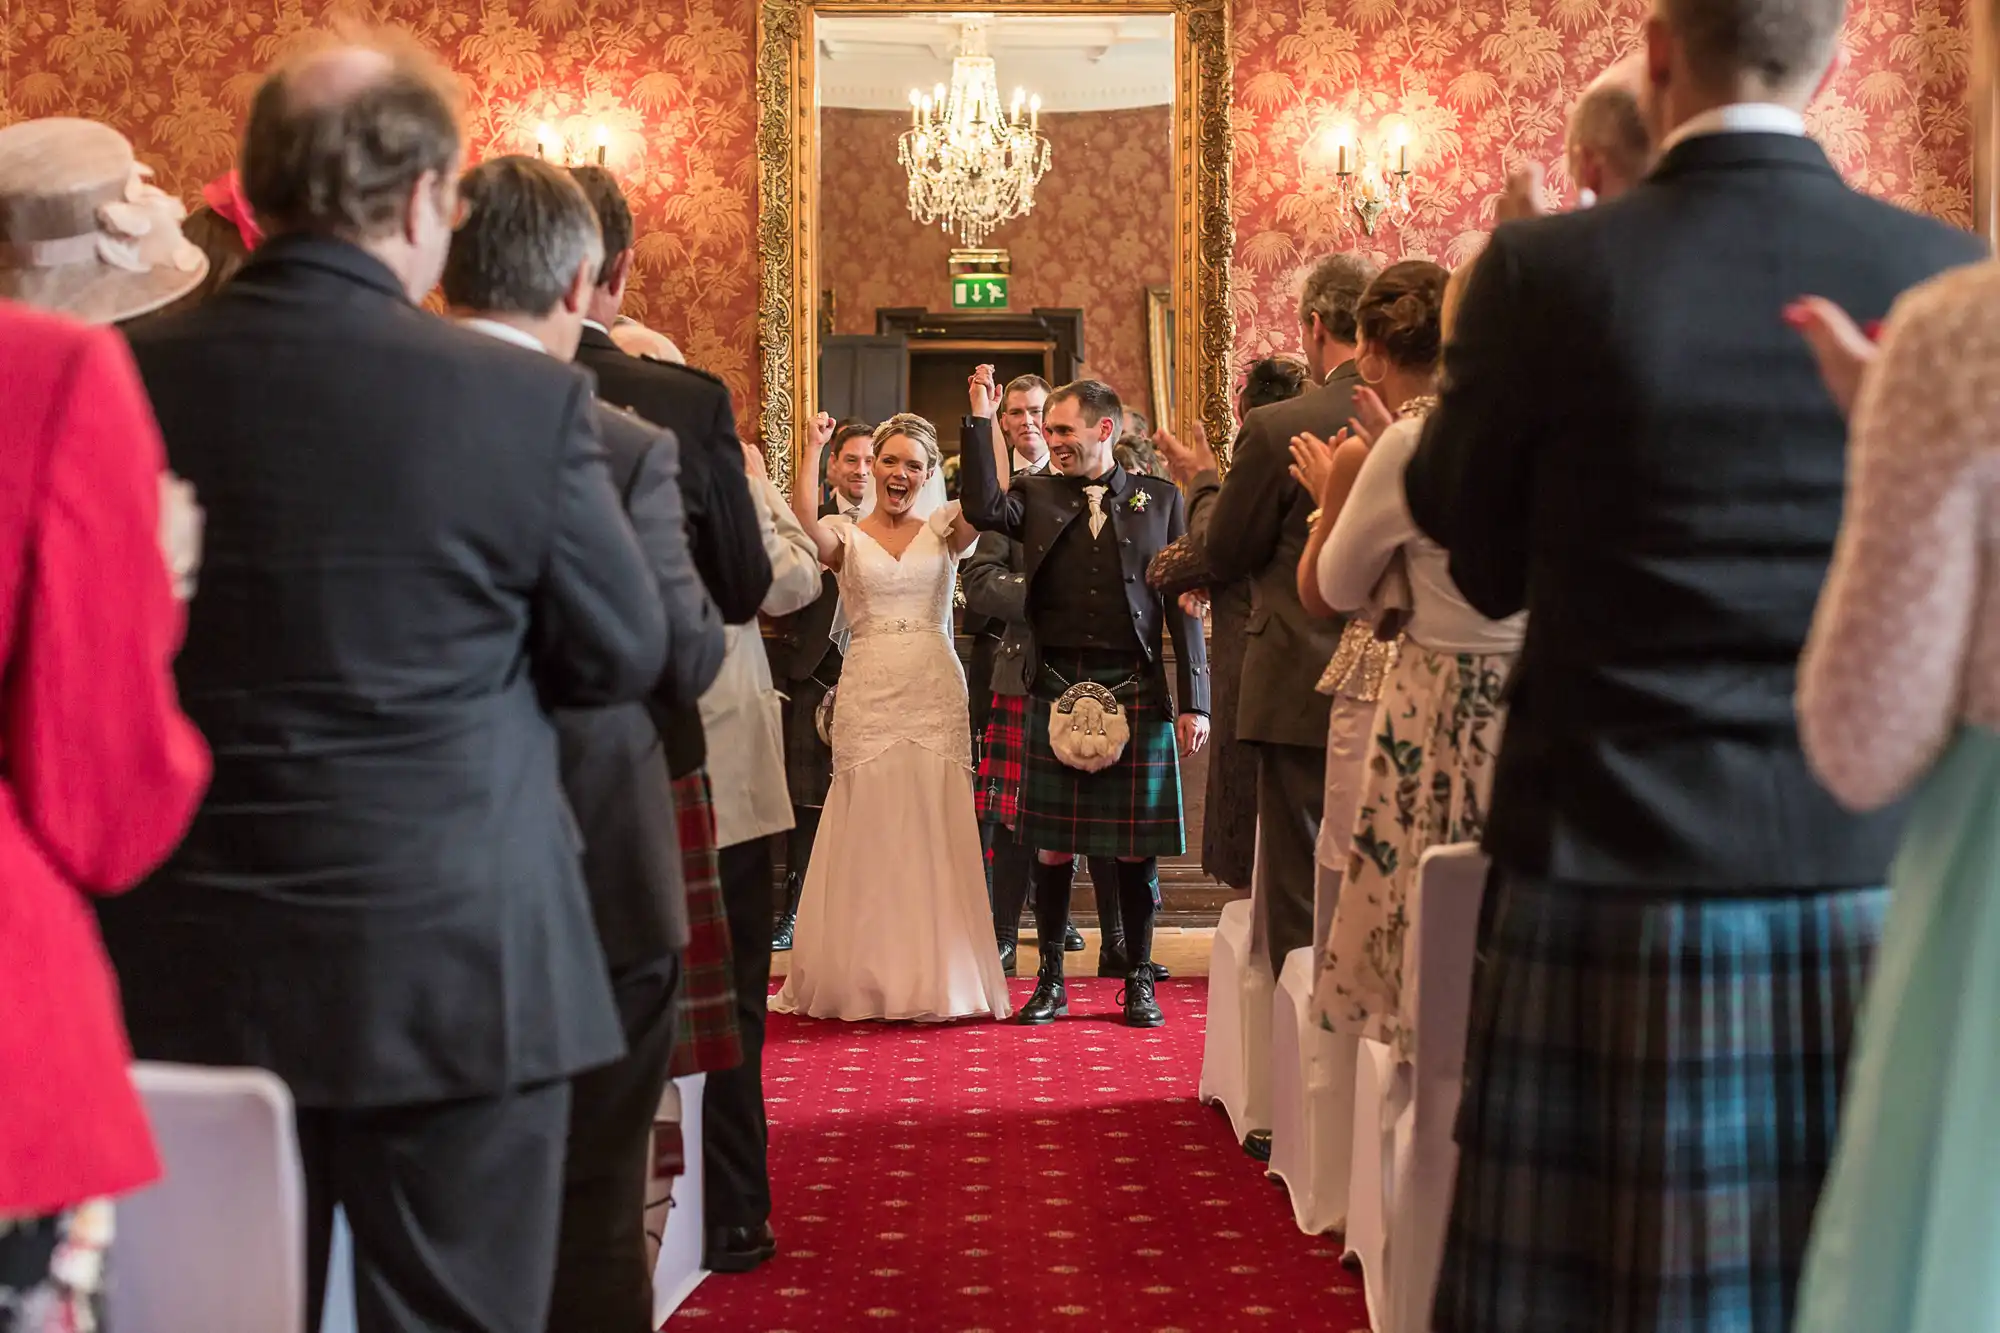 A newlywed couple walks down the aisle, smiling, as guests applaud. the groom is in a kilt and the bride in a white dress.